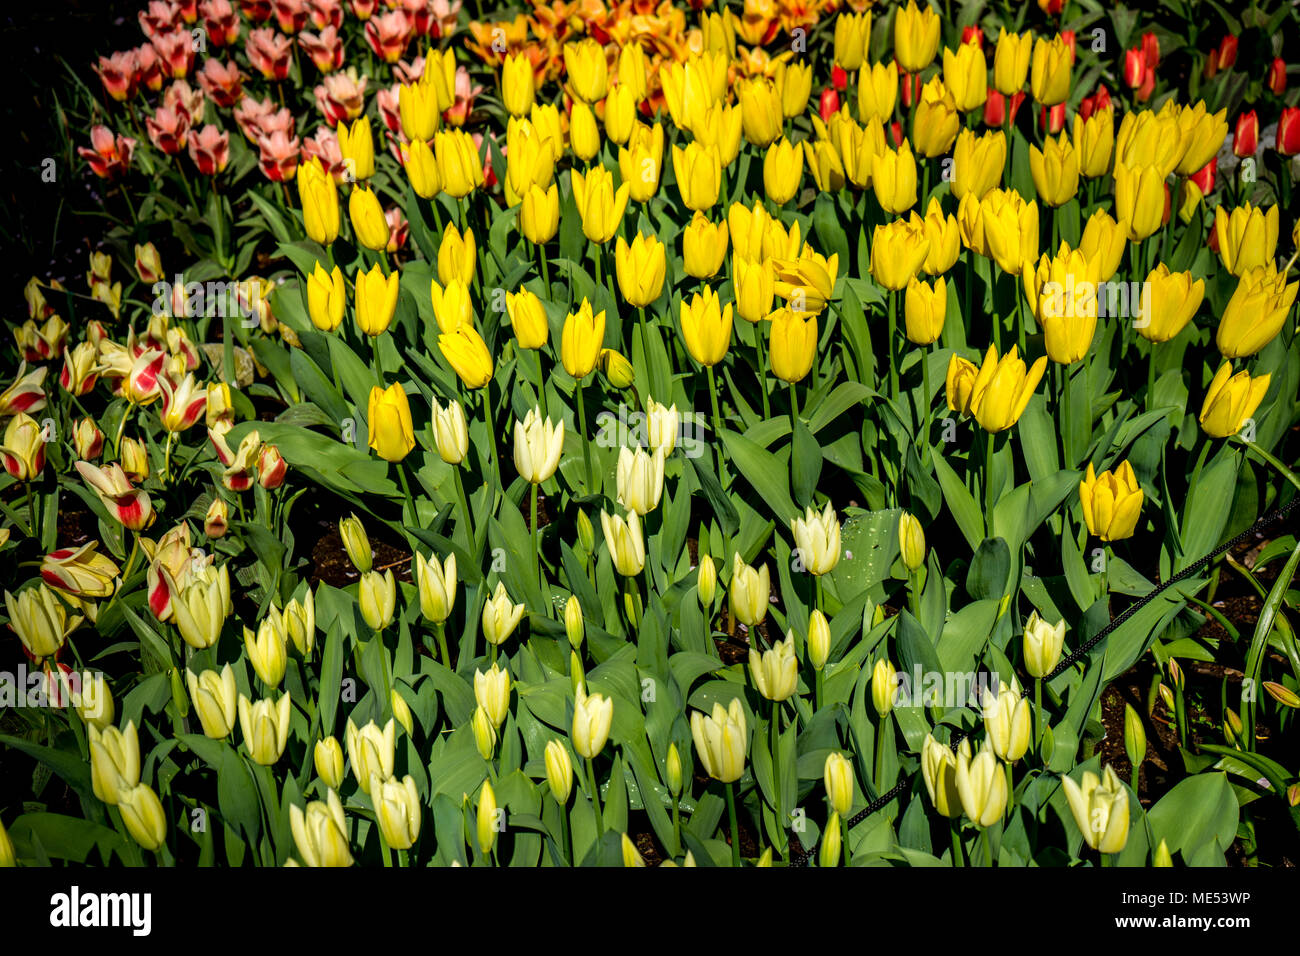 White and yellow tulip flower with a blurred background in Lisse, Netherlands, Europe Stock Photo